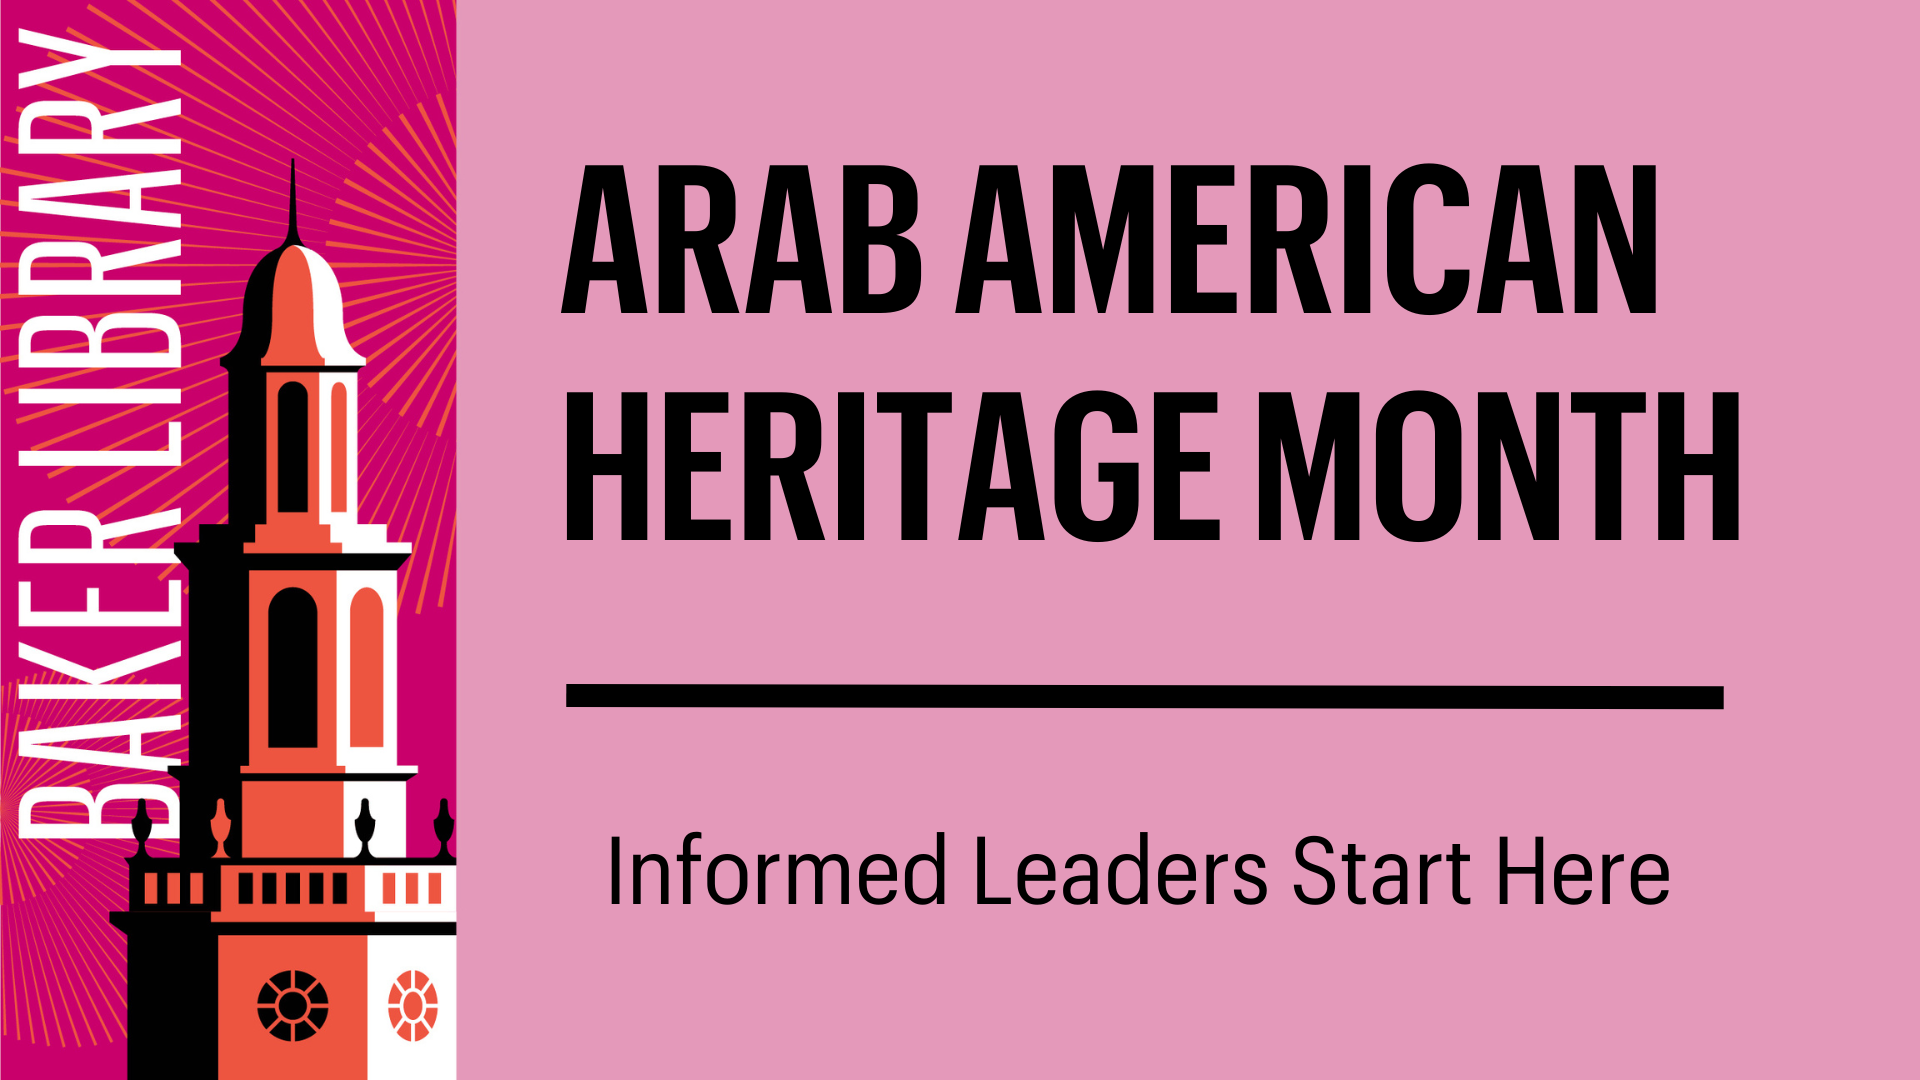 An image that says "Arab American Heritage Month" with "Informed Leaders Start Here" as a subsection